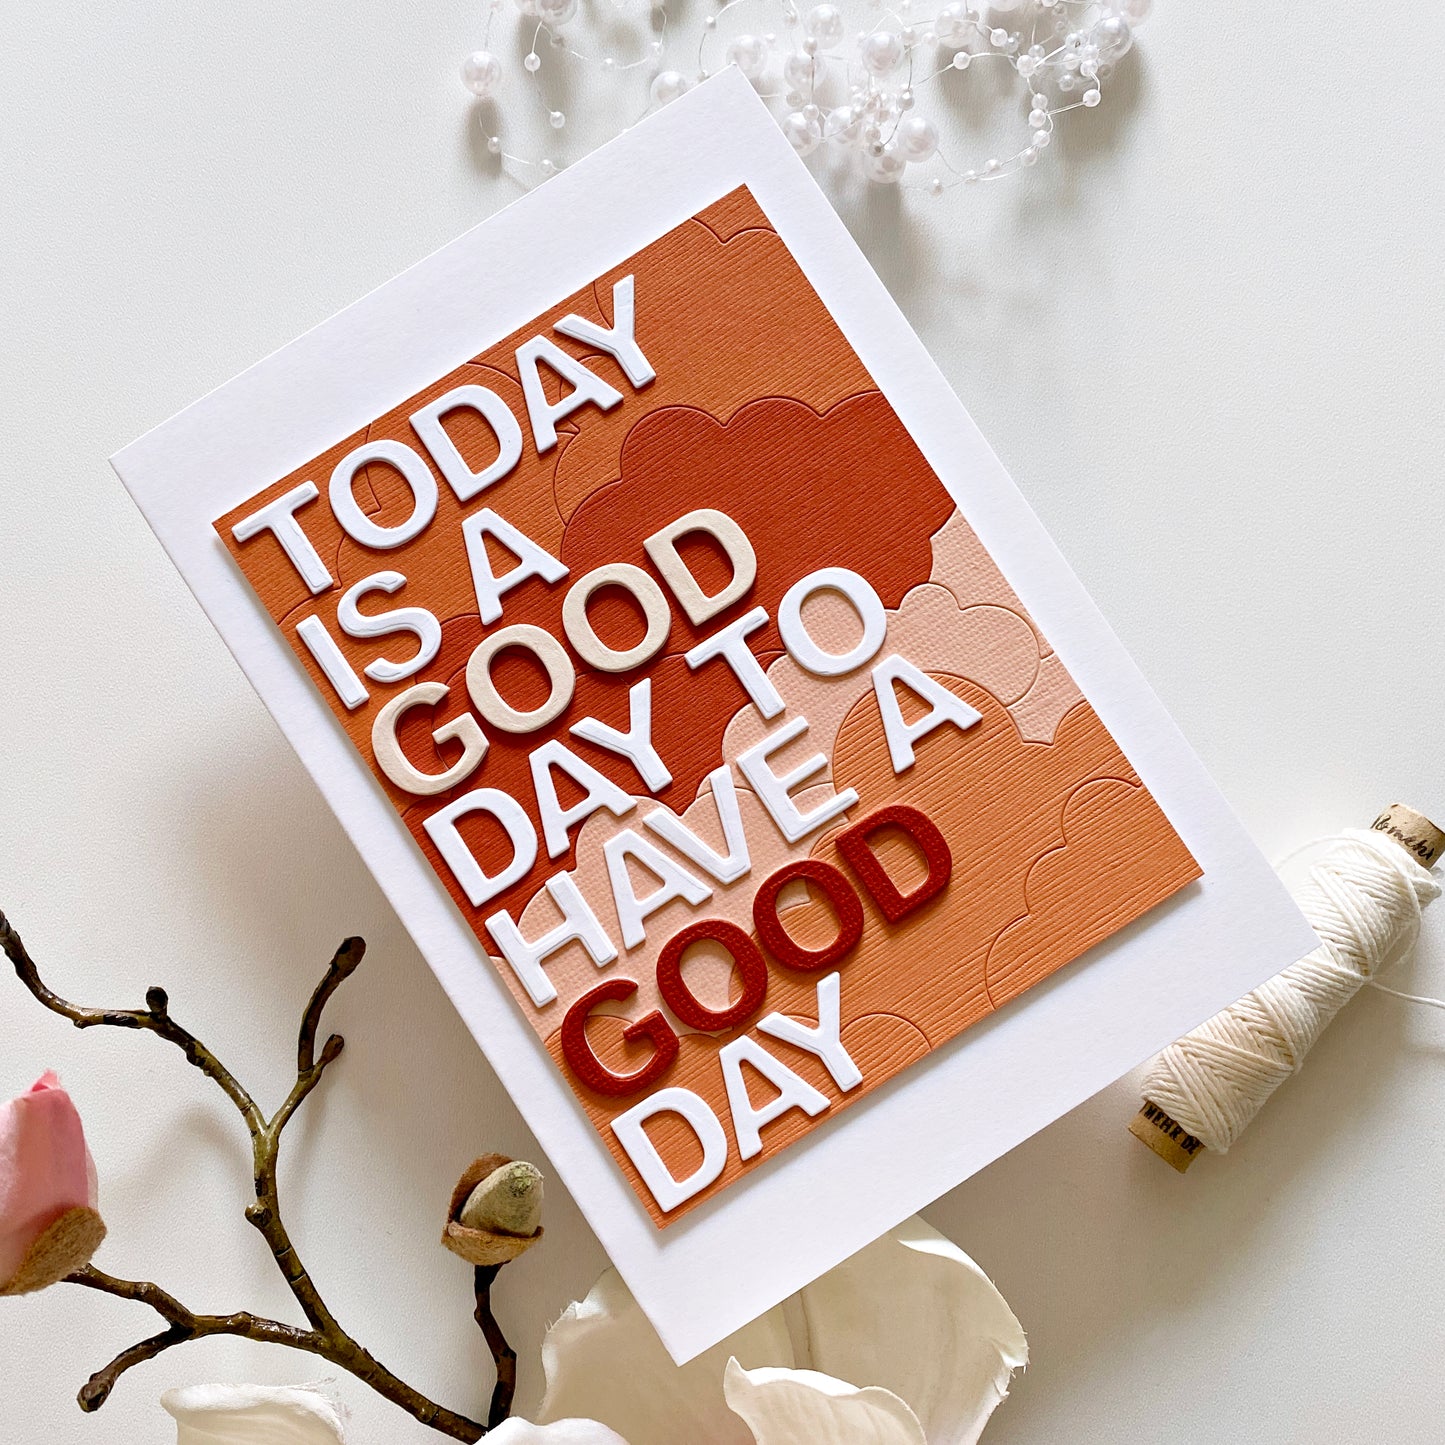 Today is a Good Day Die by Paige Taylor Evans